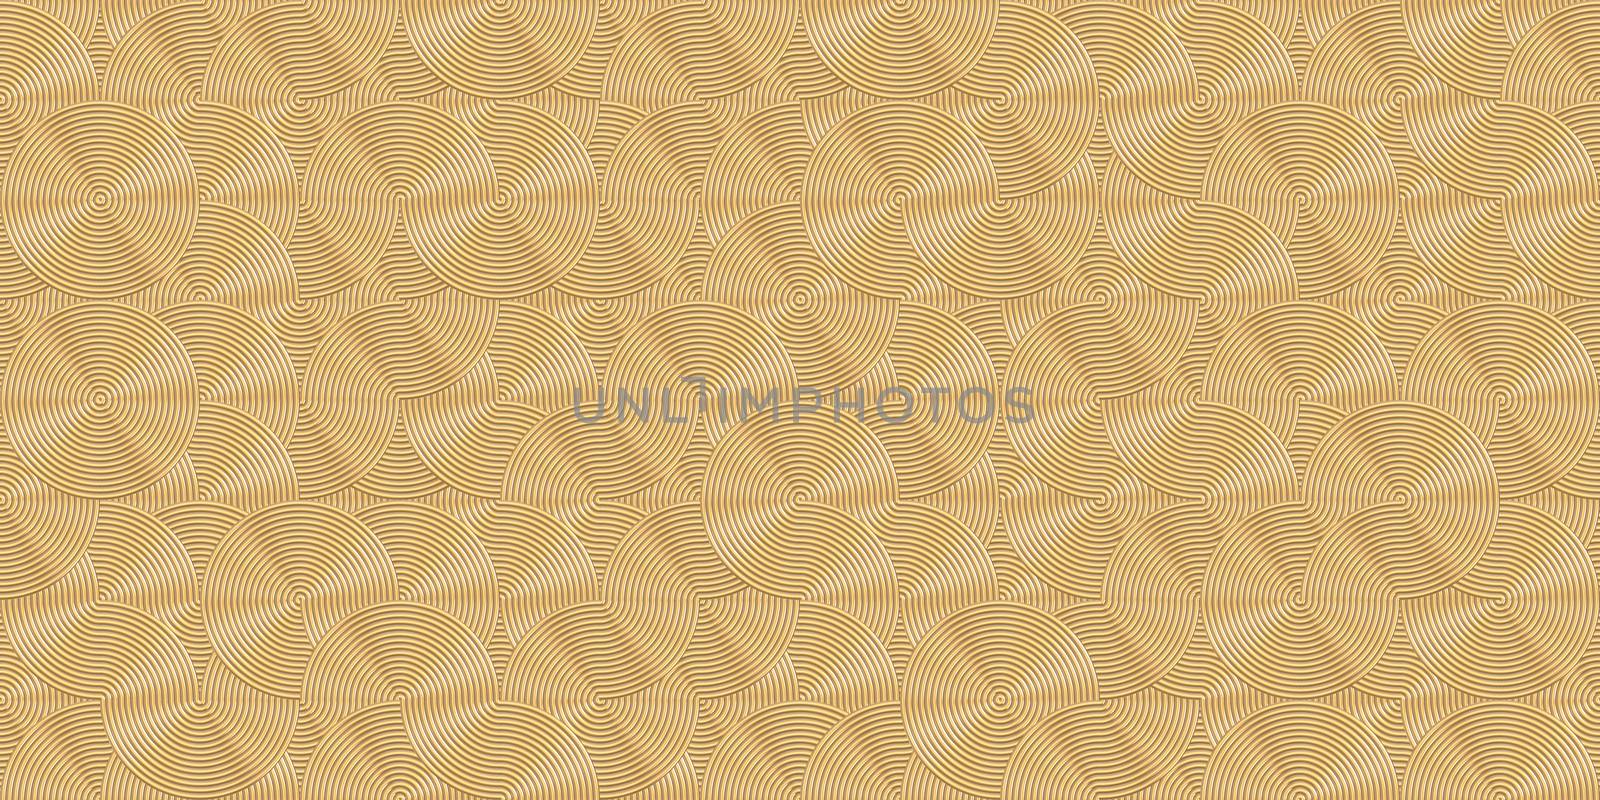 Vintage rings background. Metal circles pattern. Gold art deco seamless texture. by sanches812